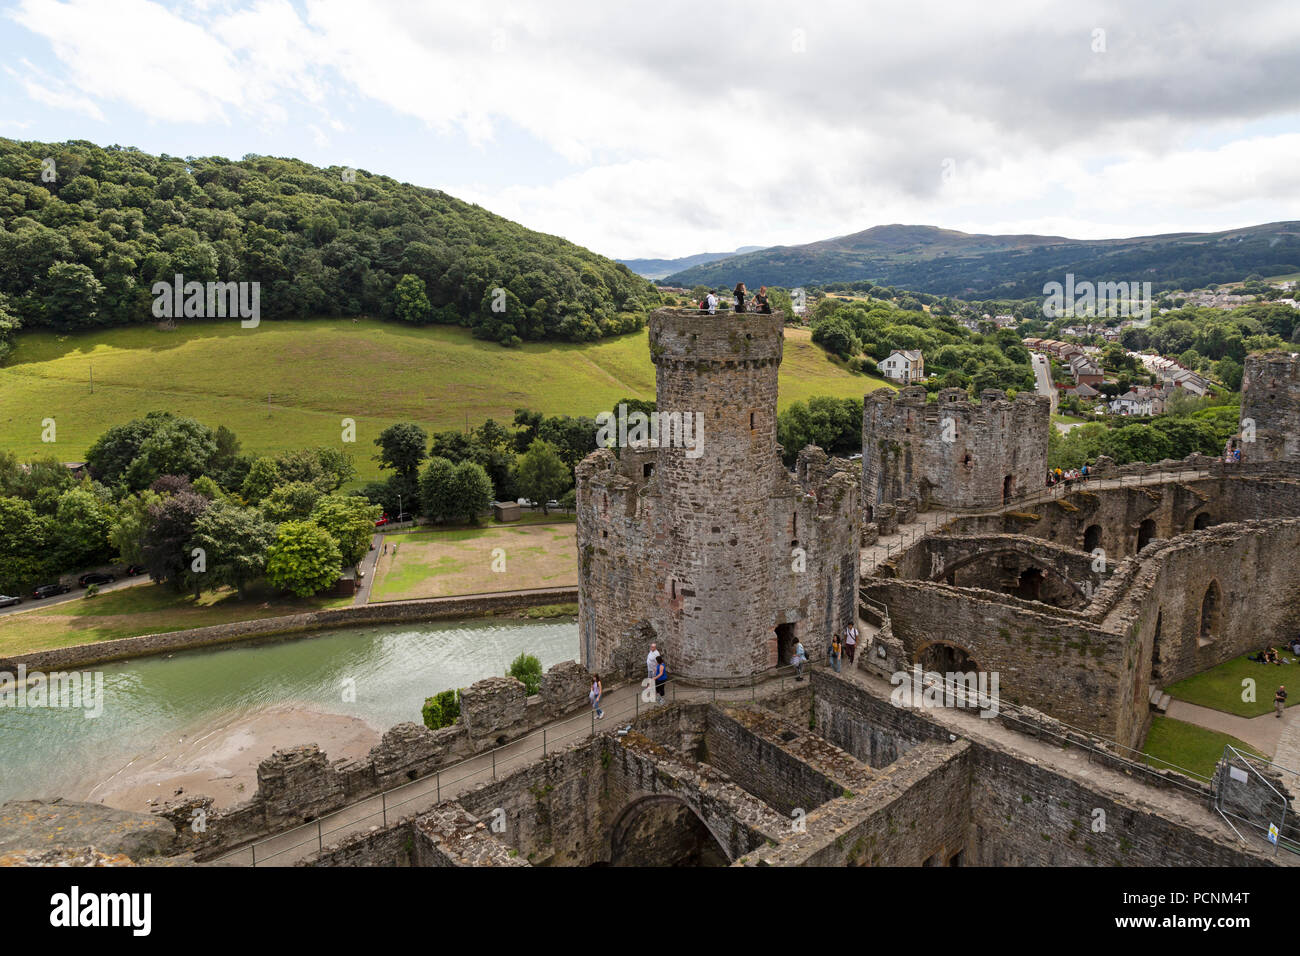 A view of some of the buildings making up Conwy castle in North Wales, with the surrounding hills and mountains in the background. Stock Photo